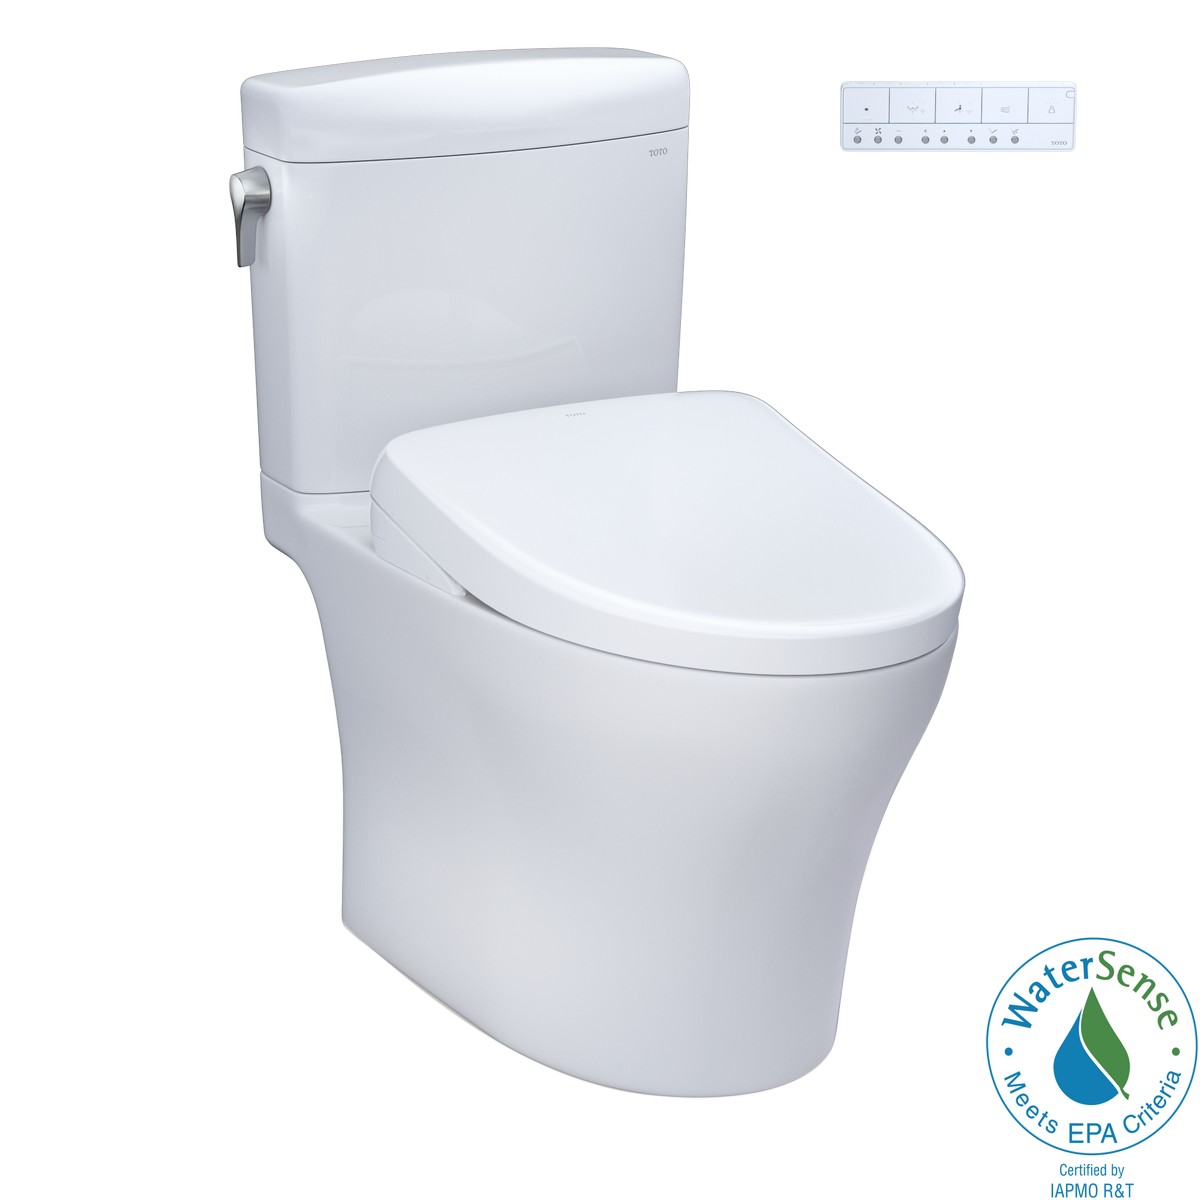 TOTO MW4364736CEMFG#01 WASHLET+ AQUIA IV CUBE 1.28 AND 0.9 GPF TWO PIECE DUAL FLUSH ELONGATED TOILET WITH WASHLET S7A BIDET SEAT IN COTTON WHITE